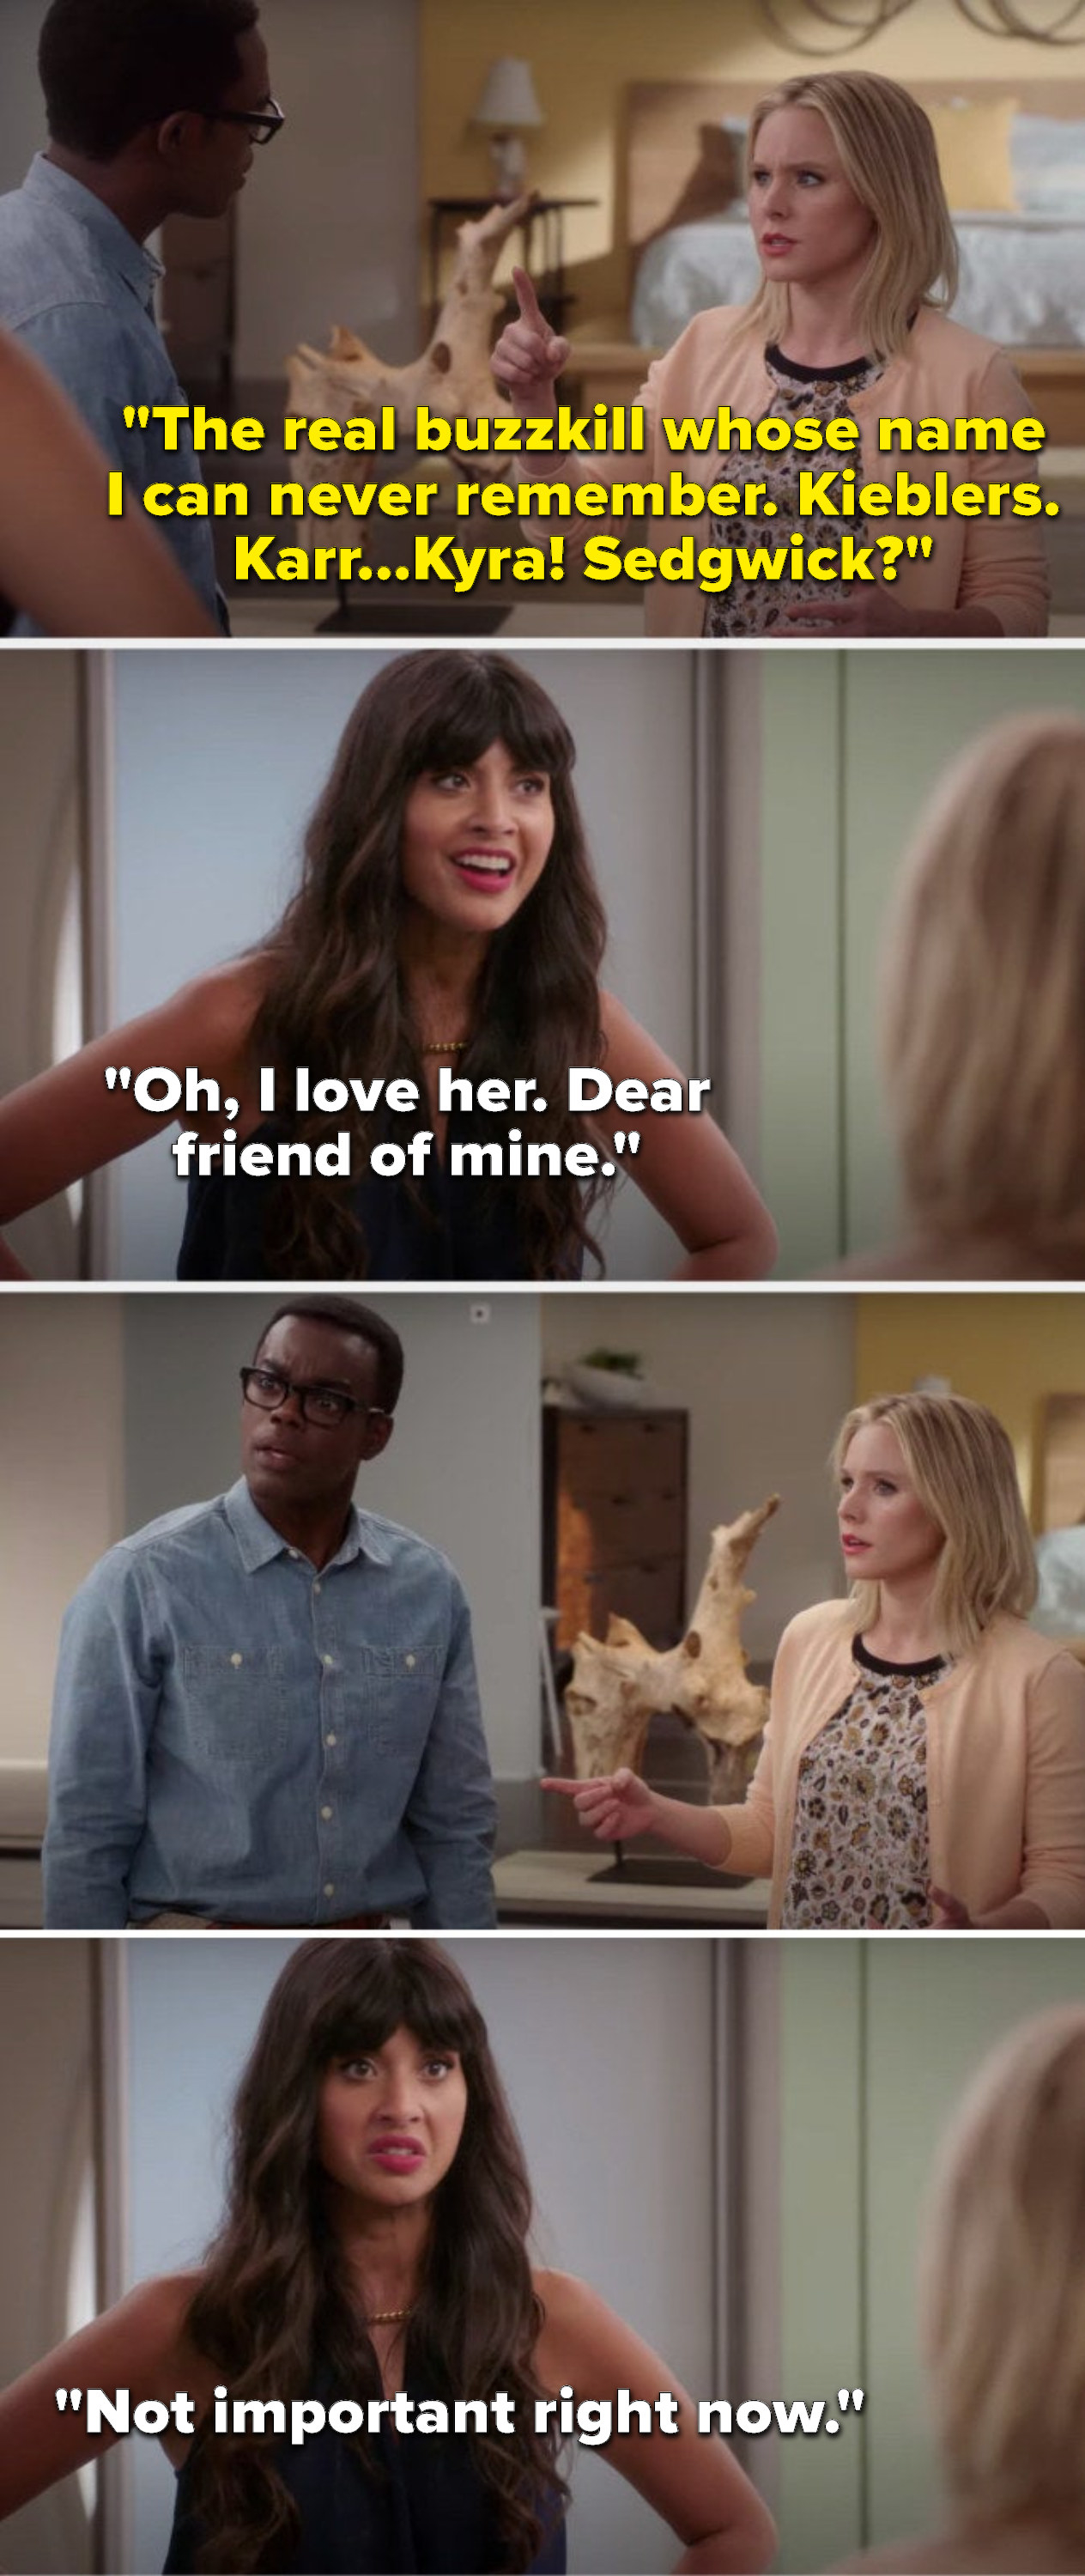 Eleanor says, The real buzzkill whose name I can never remember. Kieblers, Karr, Kyra, Sedgwick, Tahani says, Oh, I love her, dear friend of mine, Chidi and Eleanor glare at her and Tahani says, Not important right now